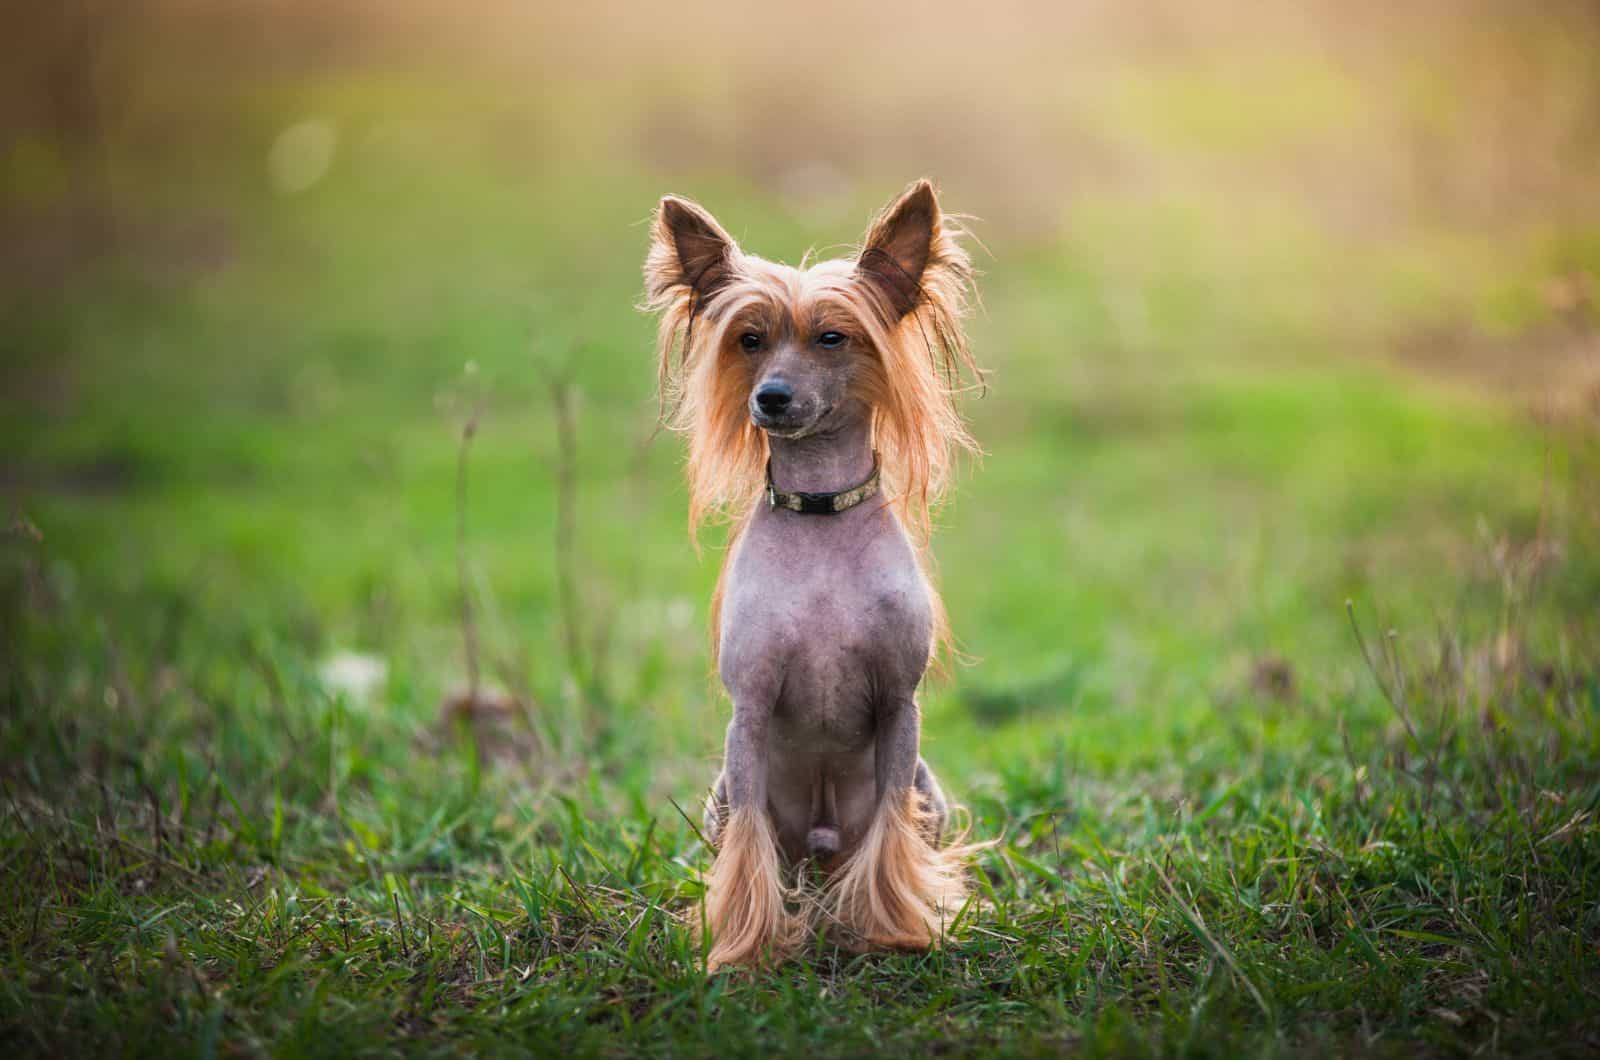 Chinese Crested sitting on grass